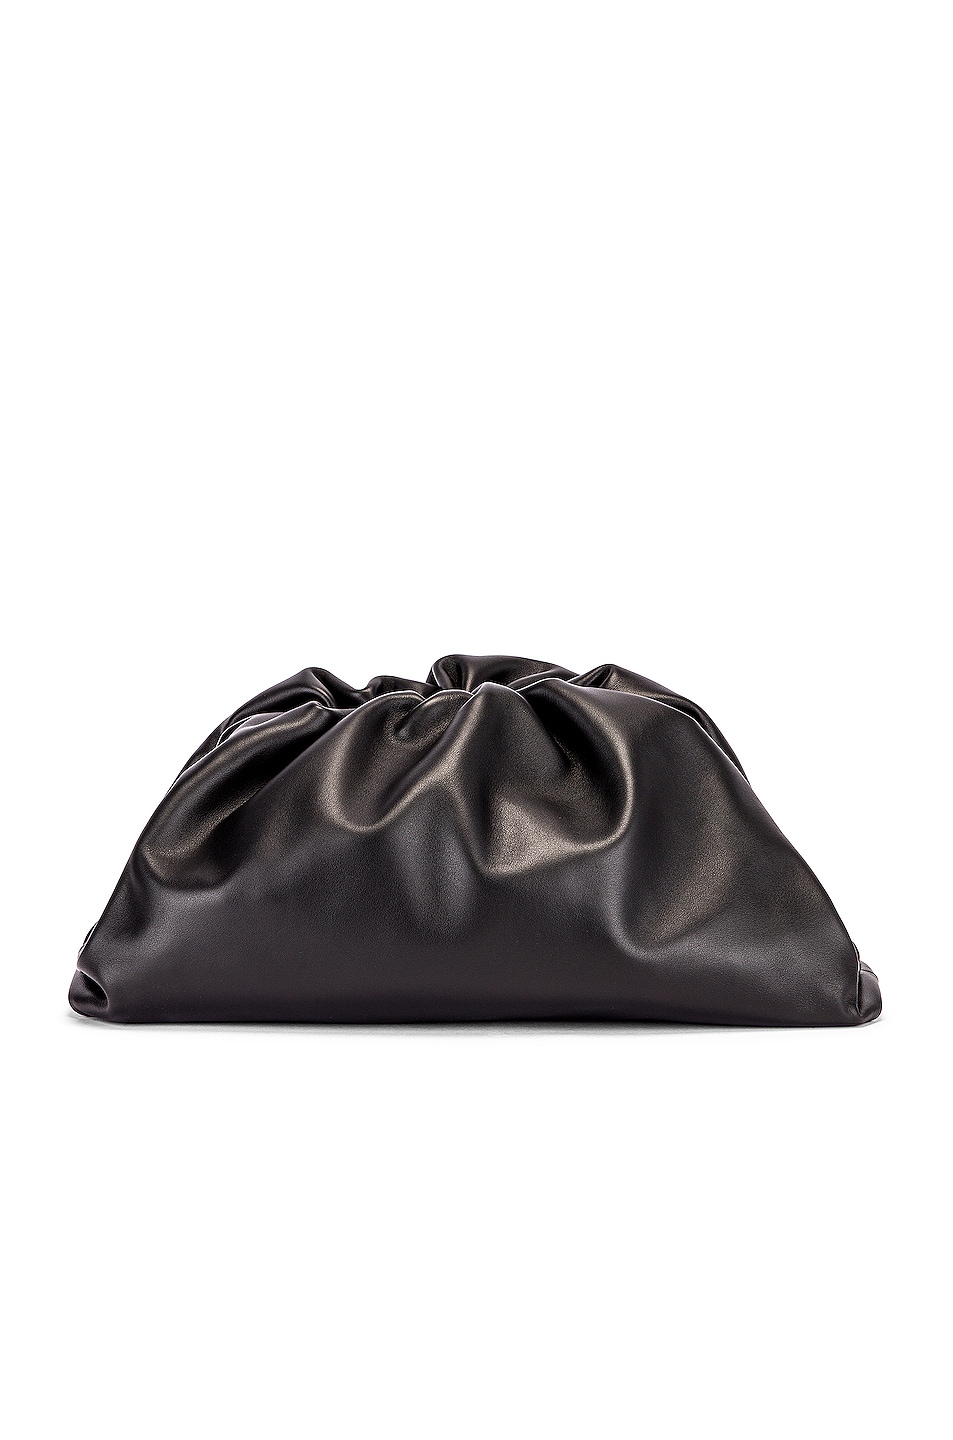 The Pouch Clutch in Black